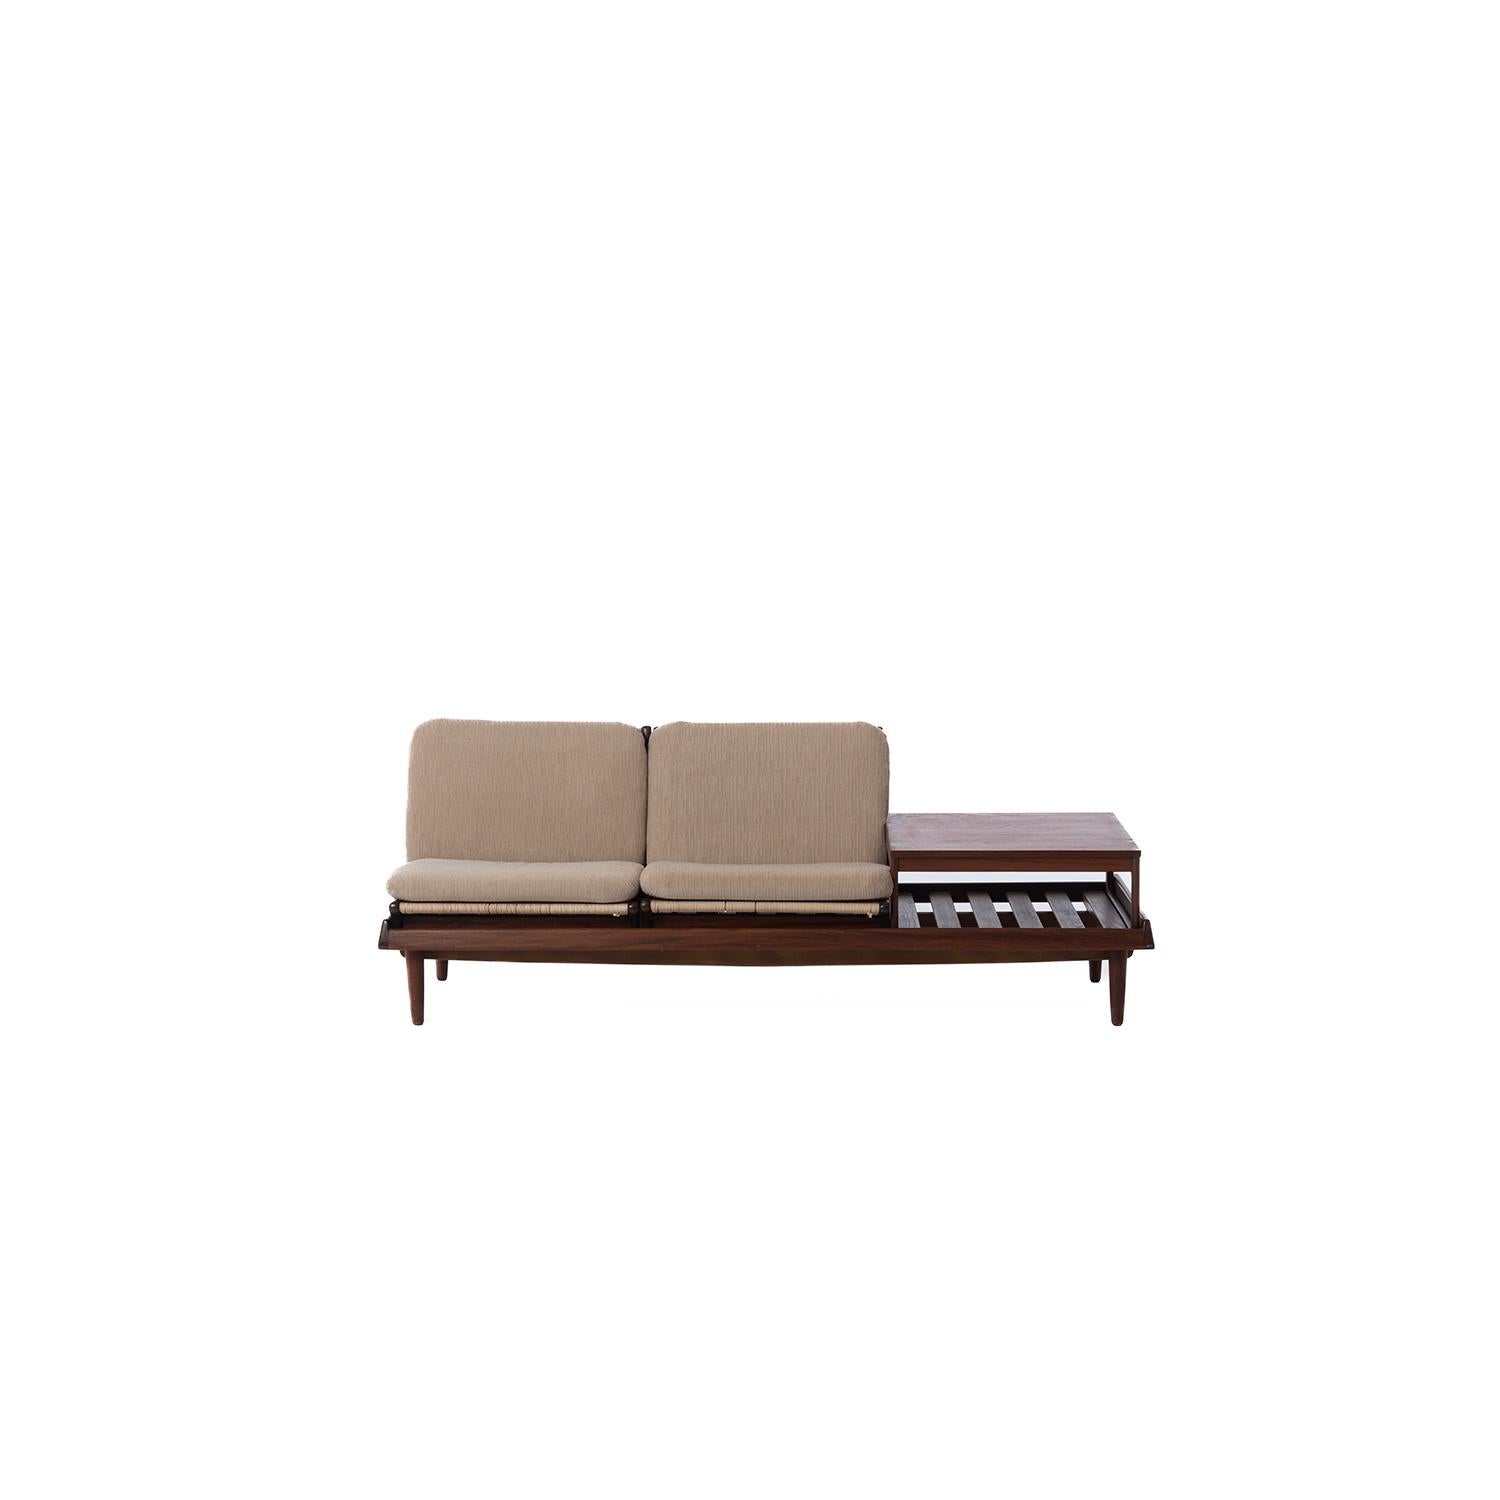 A Danish modern sofa designed by Hans Olsen. Modular seats and side table can be reconfigured to different options. Platform can double as daybed by laying the seat cushions down. Rope woven seats. Newly upholstered. Restoration of the frame will be